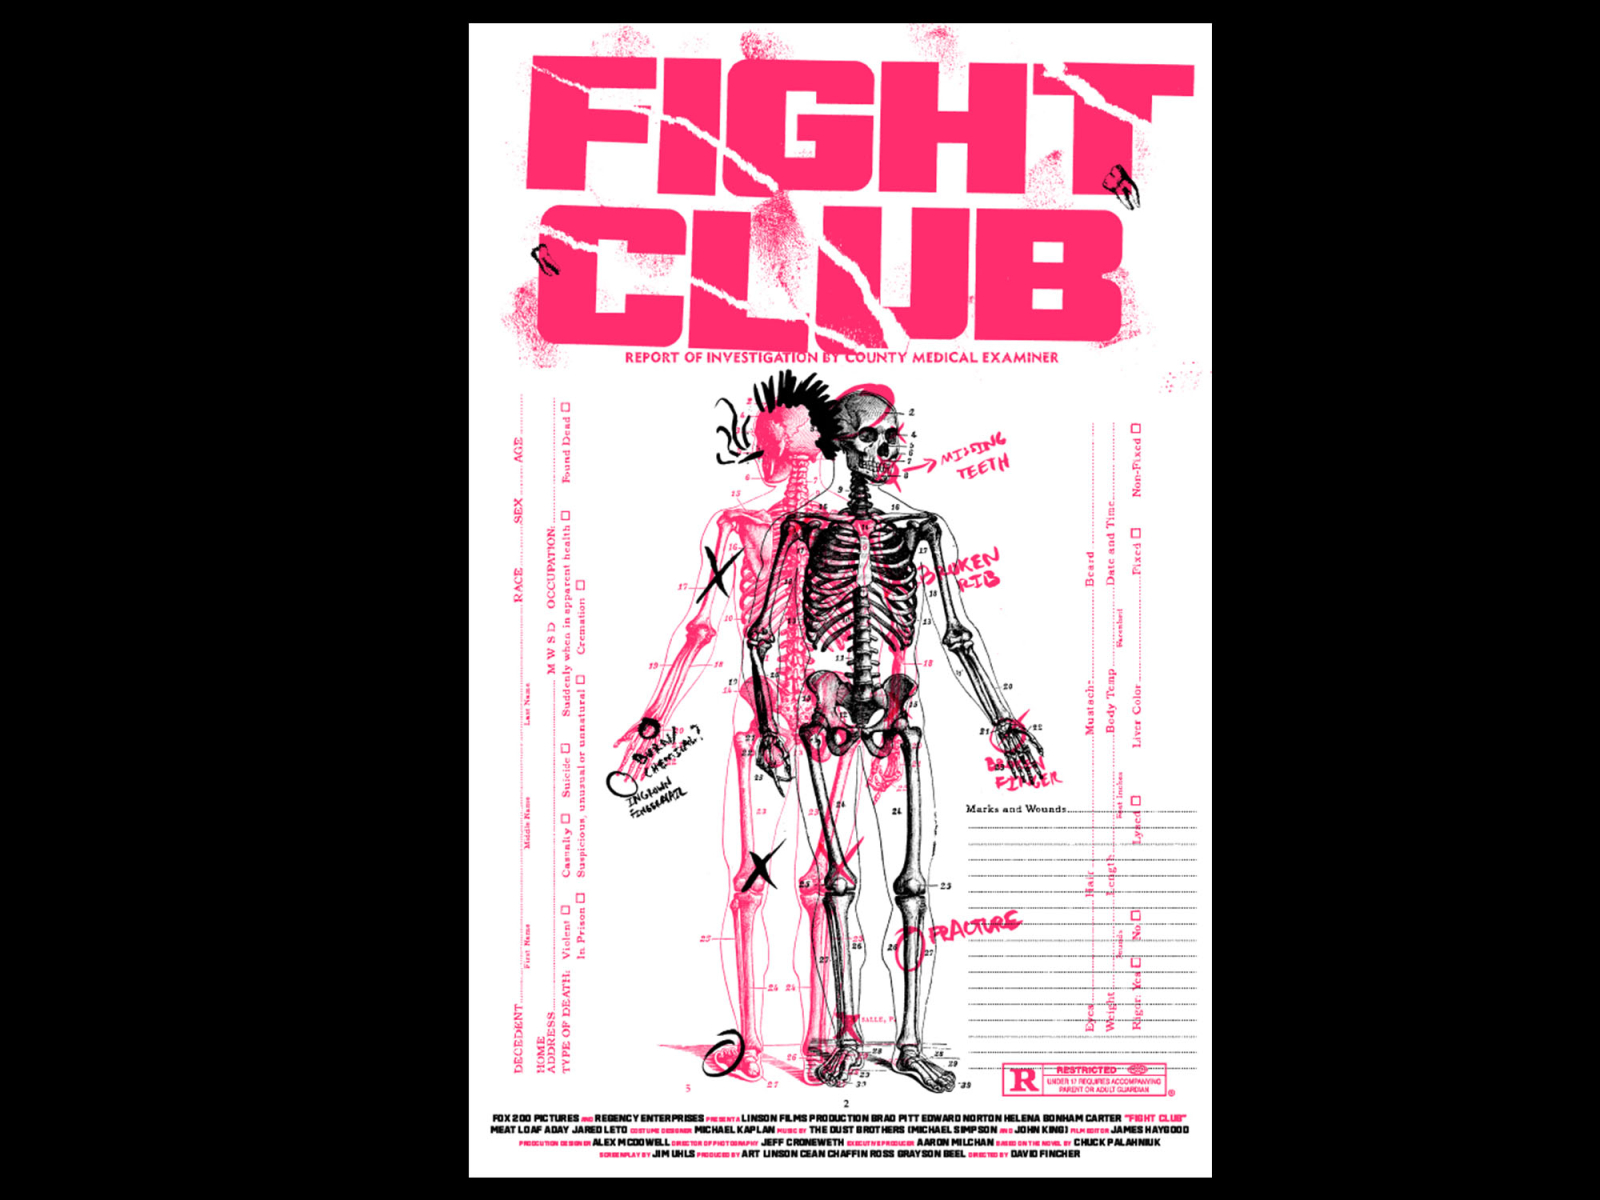 Fight Club (1999) Alternative Poster collage cult cult film dark fight club illustration movie poster poster posters